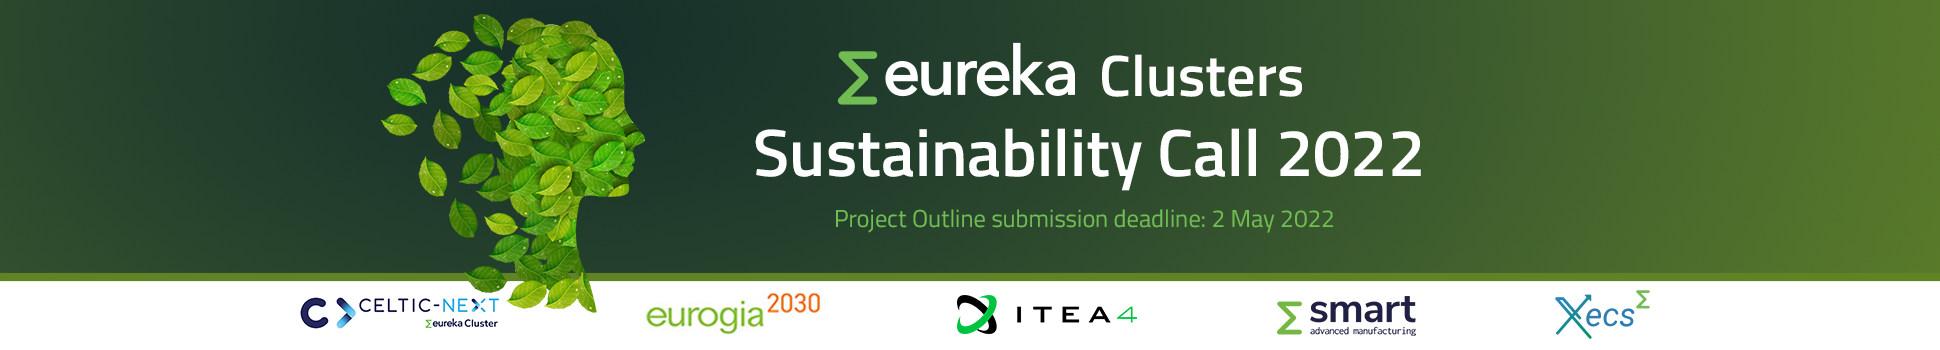 Eureka Clusters Sustainability Call 2022 page header